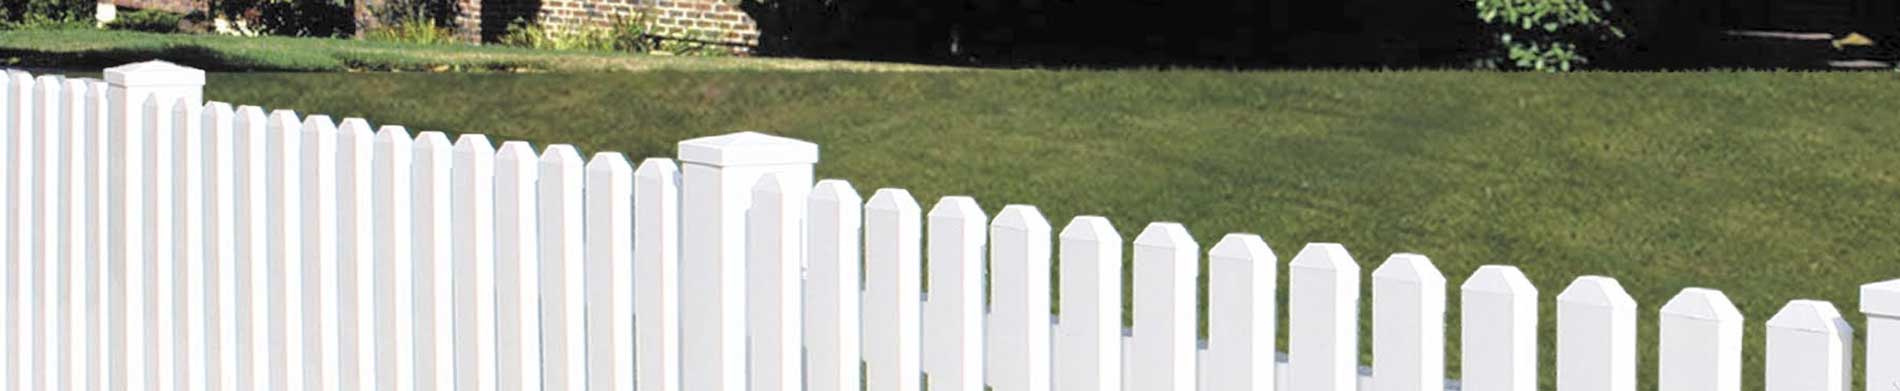 Installing a vinyl fence from Duramax can be a perfect property renovation idea